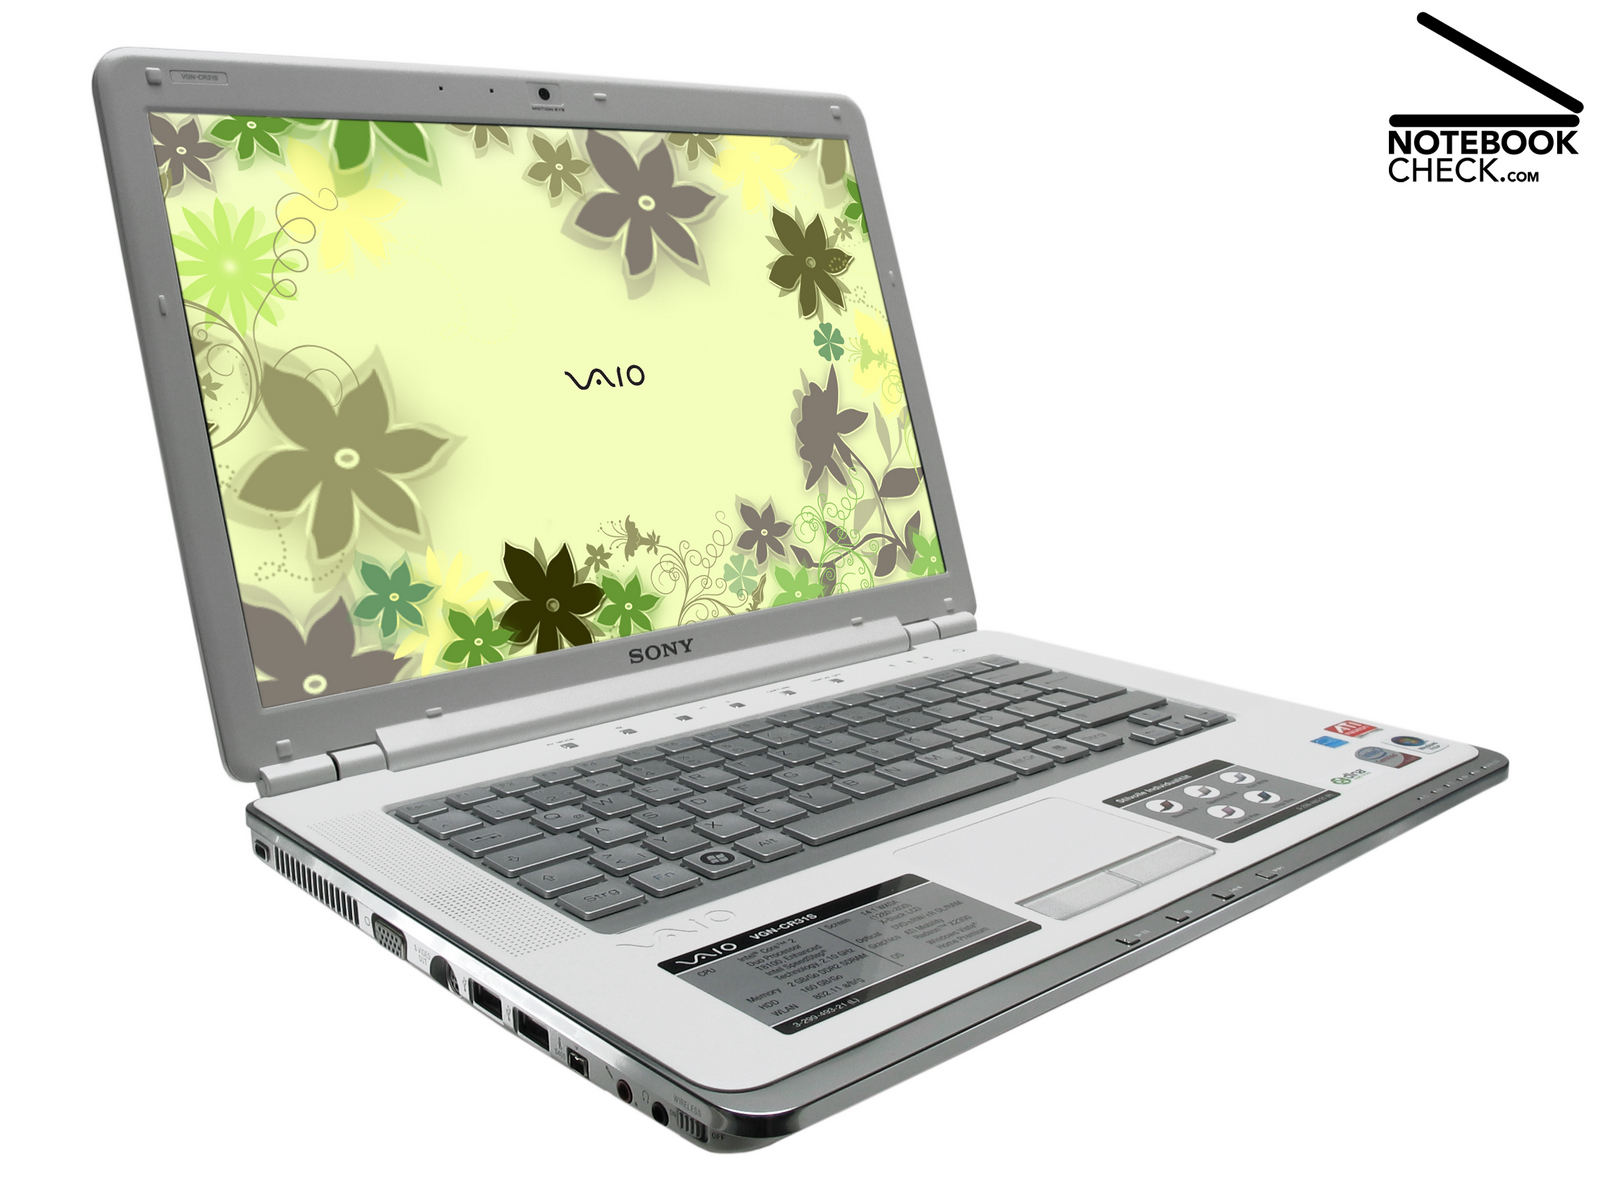 Sony Vaio Vgn-bx740 Drivers For Mac